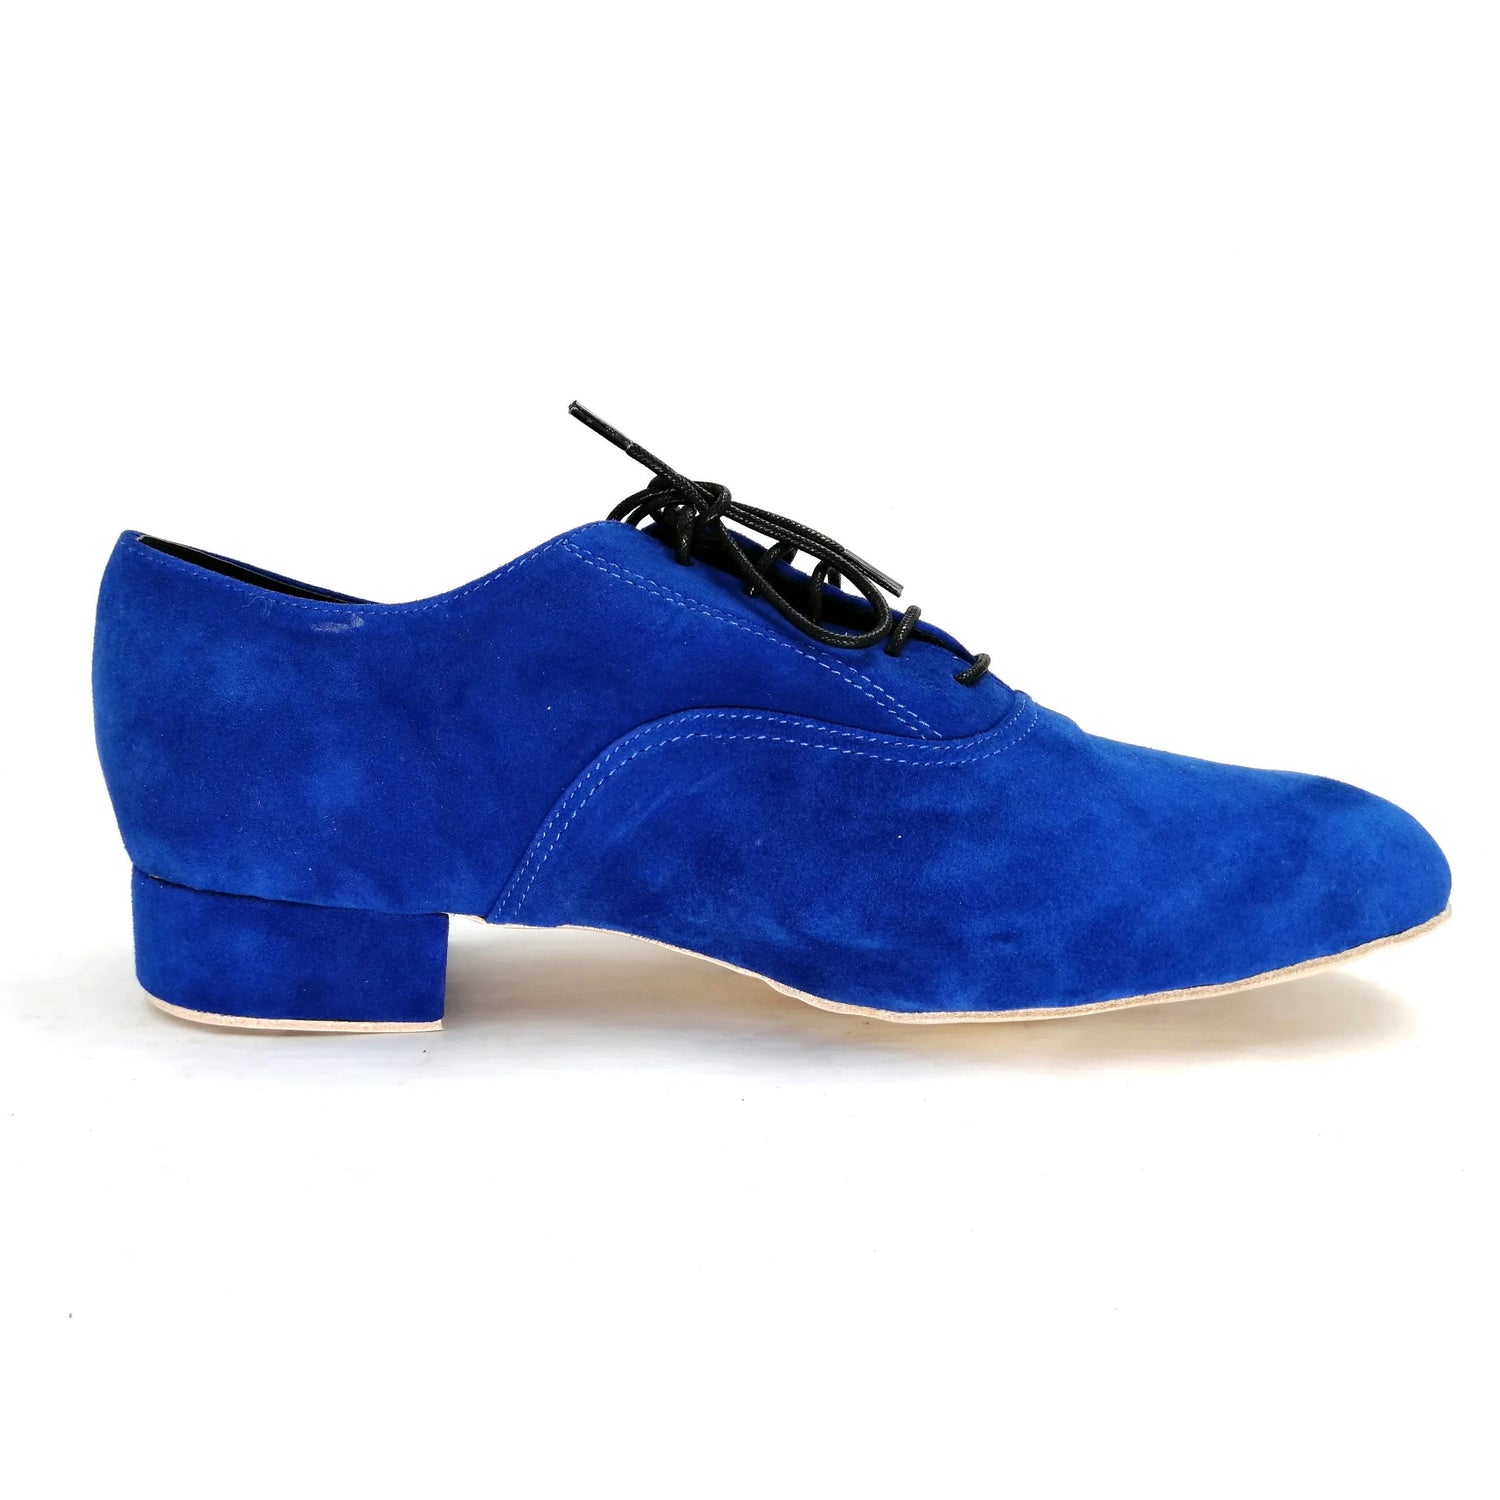 Men's Pro Dancer blue leather tango shoes with 1 inch heel PD1002A6